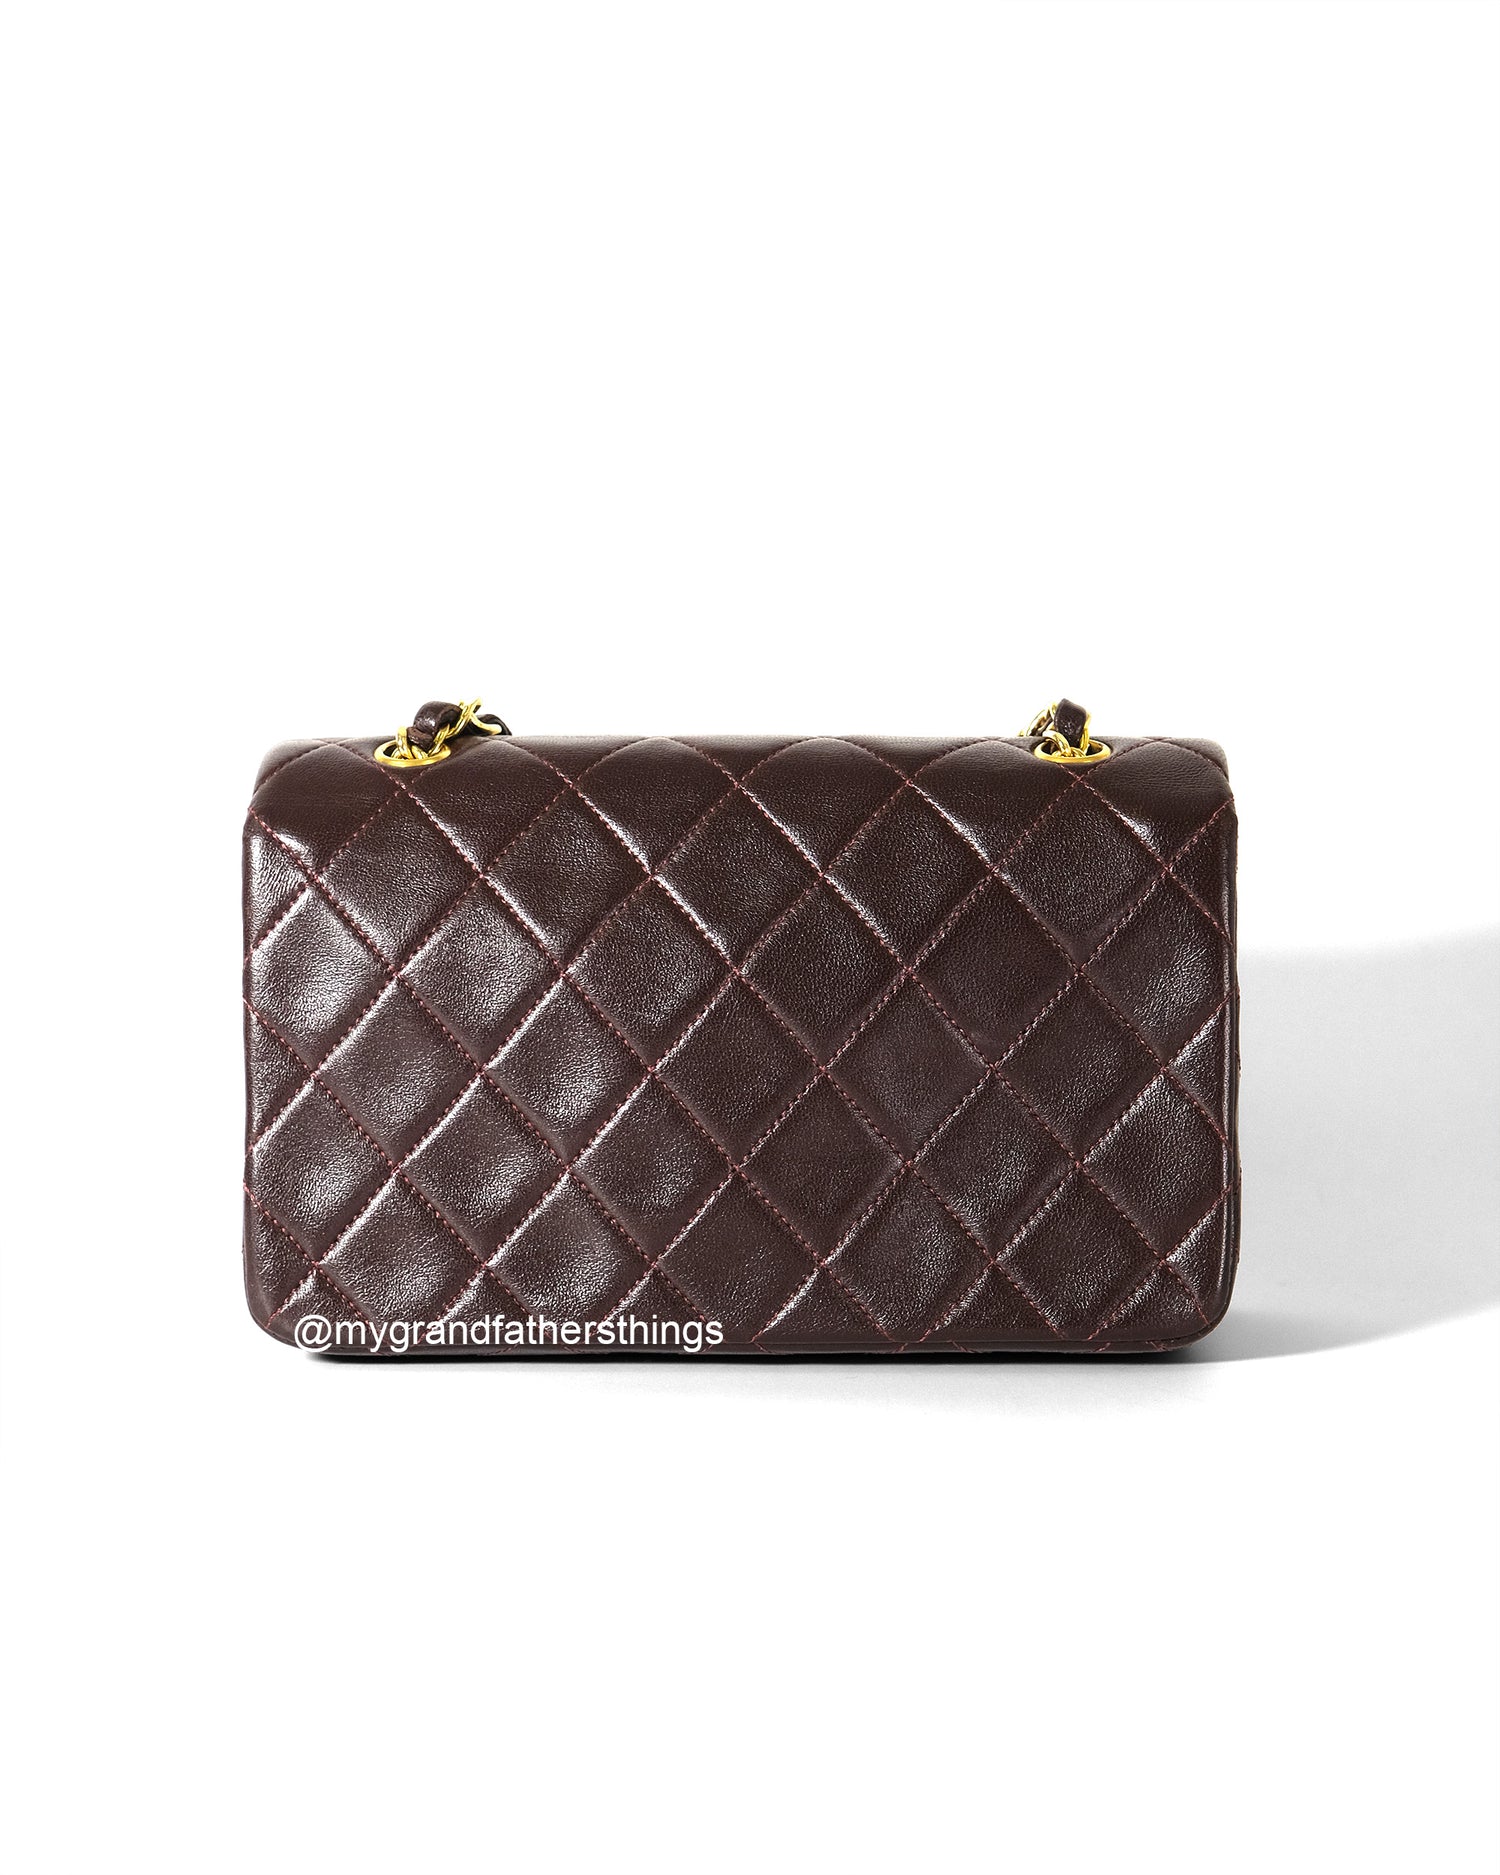 Irwin, 4 series mini full flap burgundy lambskin with serial only - My Grandfather's Things